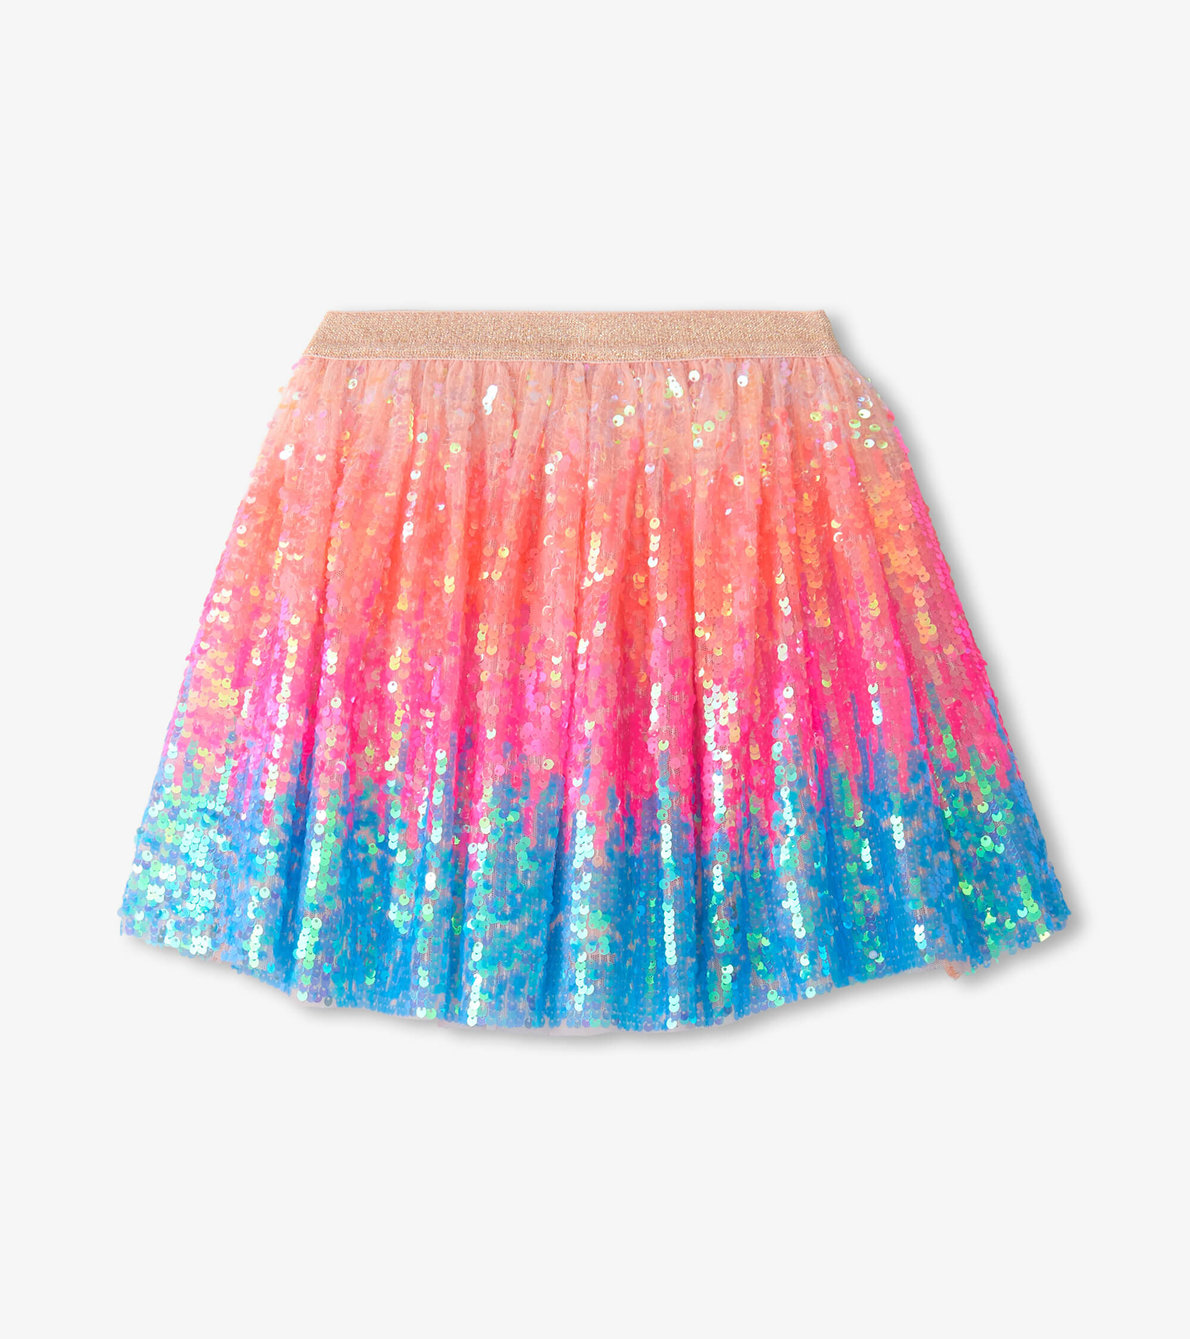 View larger image of Girls Happy Sparkly Sequin Tulle Skirt